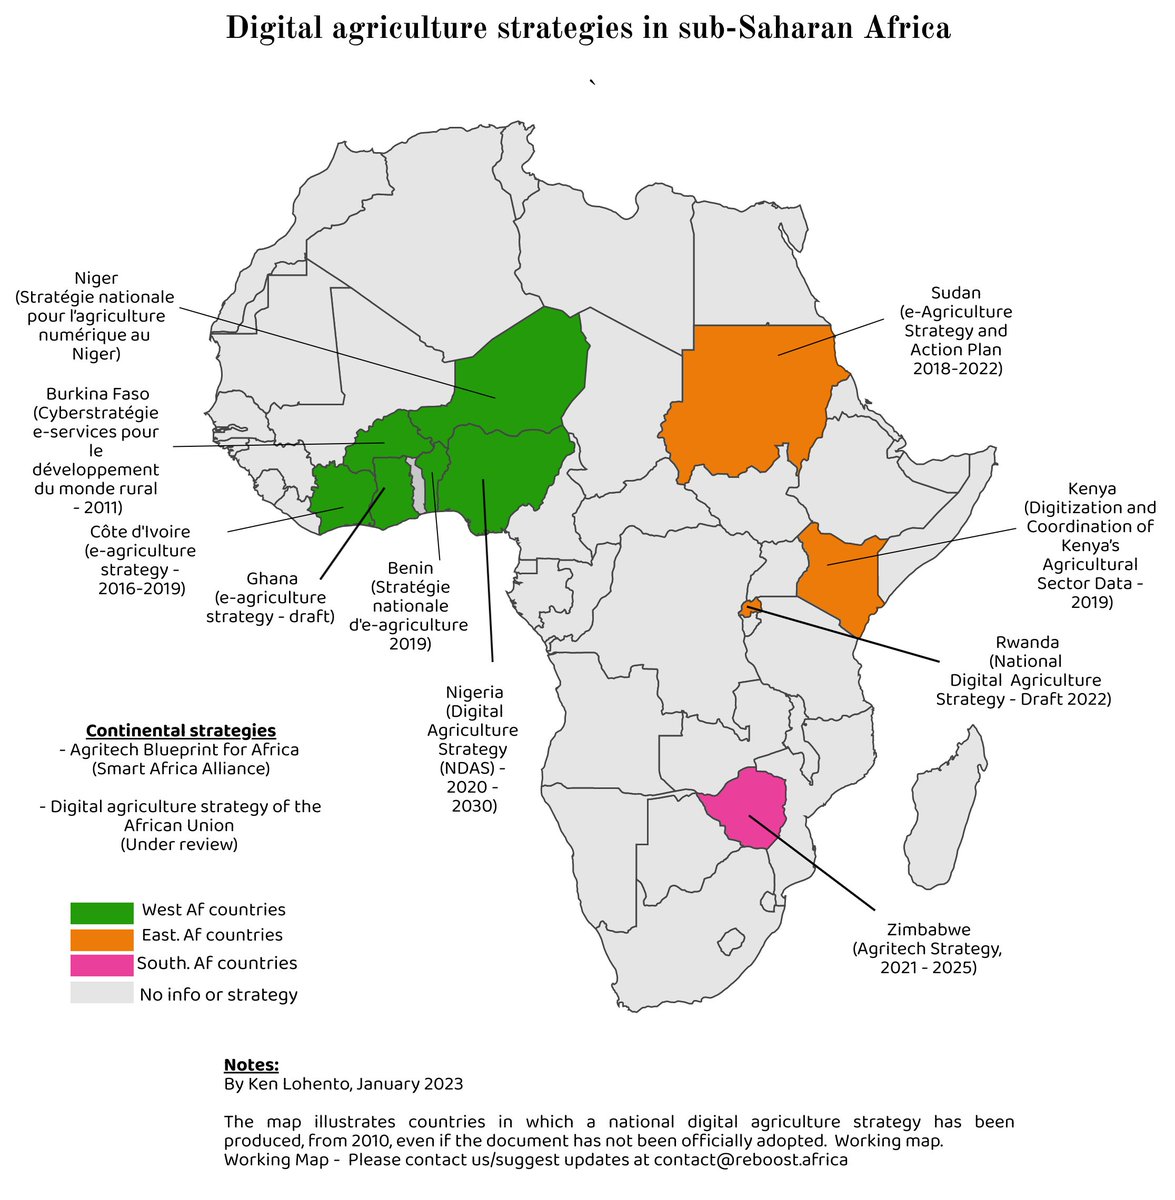 An interesting working map illustrating countries in Sub-Saharan #Africa in which a national #digitalagriculture strategy has been produced since the 2010s 👇 

For more details: lnkd.in/ewdjCEd8
@kenloh 

#FAO #digitalagriculture #estrategies #digitalstrategies #D4Ag